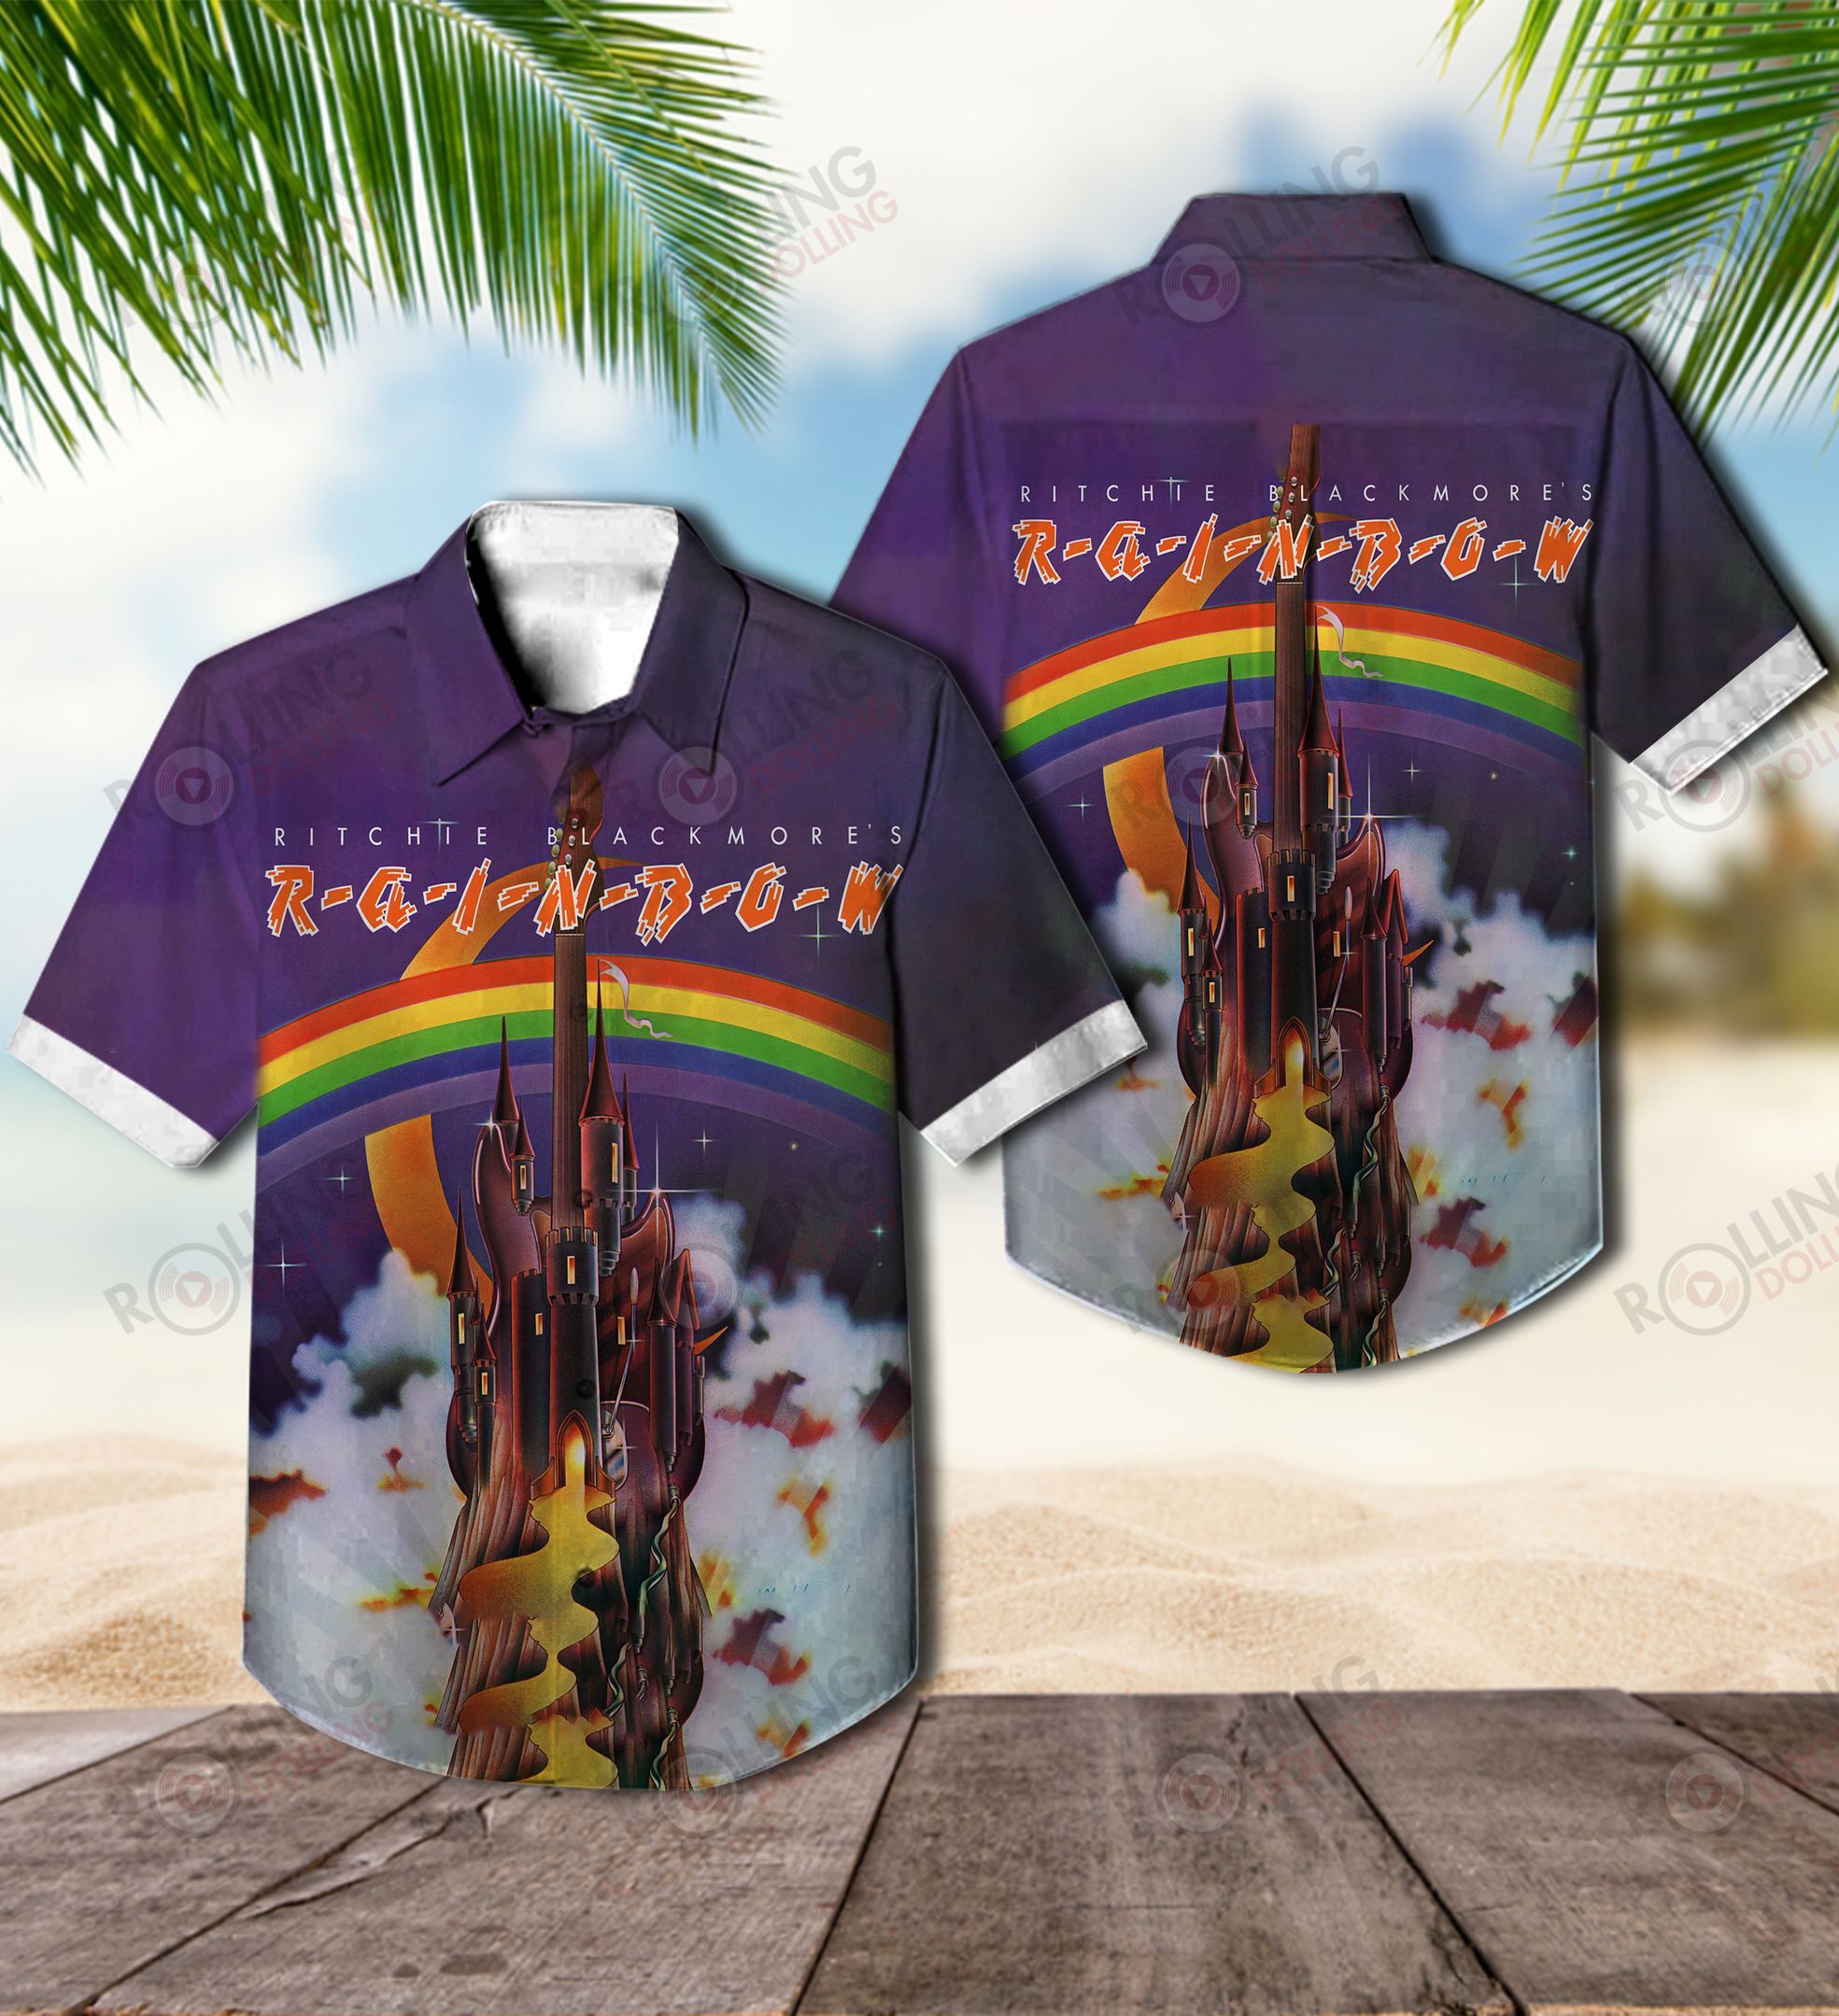 The Hawaiian Shirt is a popular shirt that is worn by Rock band fans 19